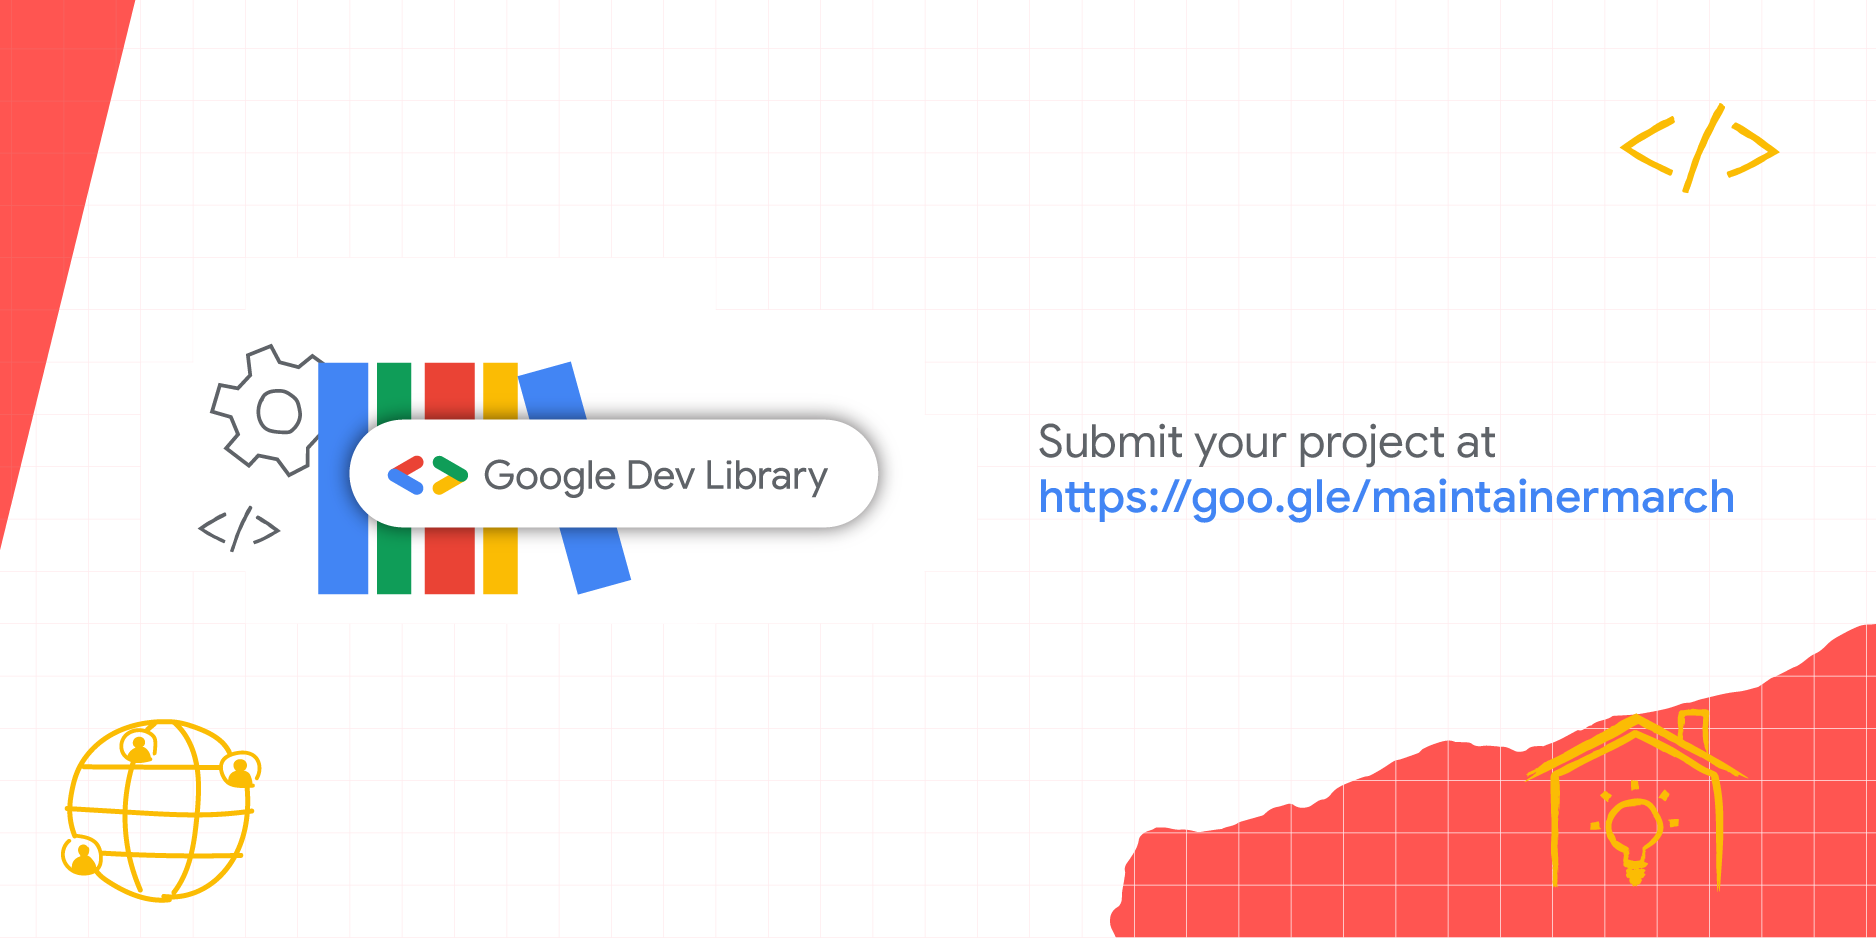 A banner with white background, th Google Dev Library on the left, and the tex: Submit your project at https://goo.gle/maintainermarch on the right